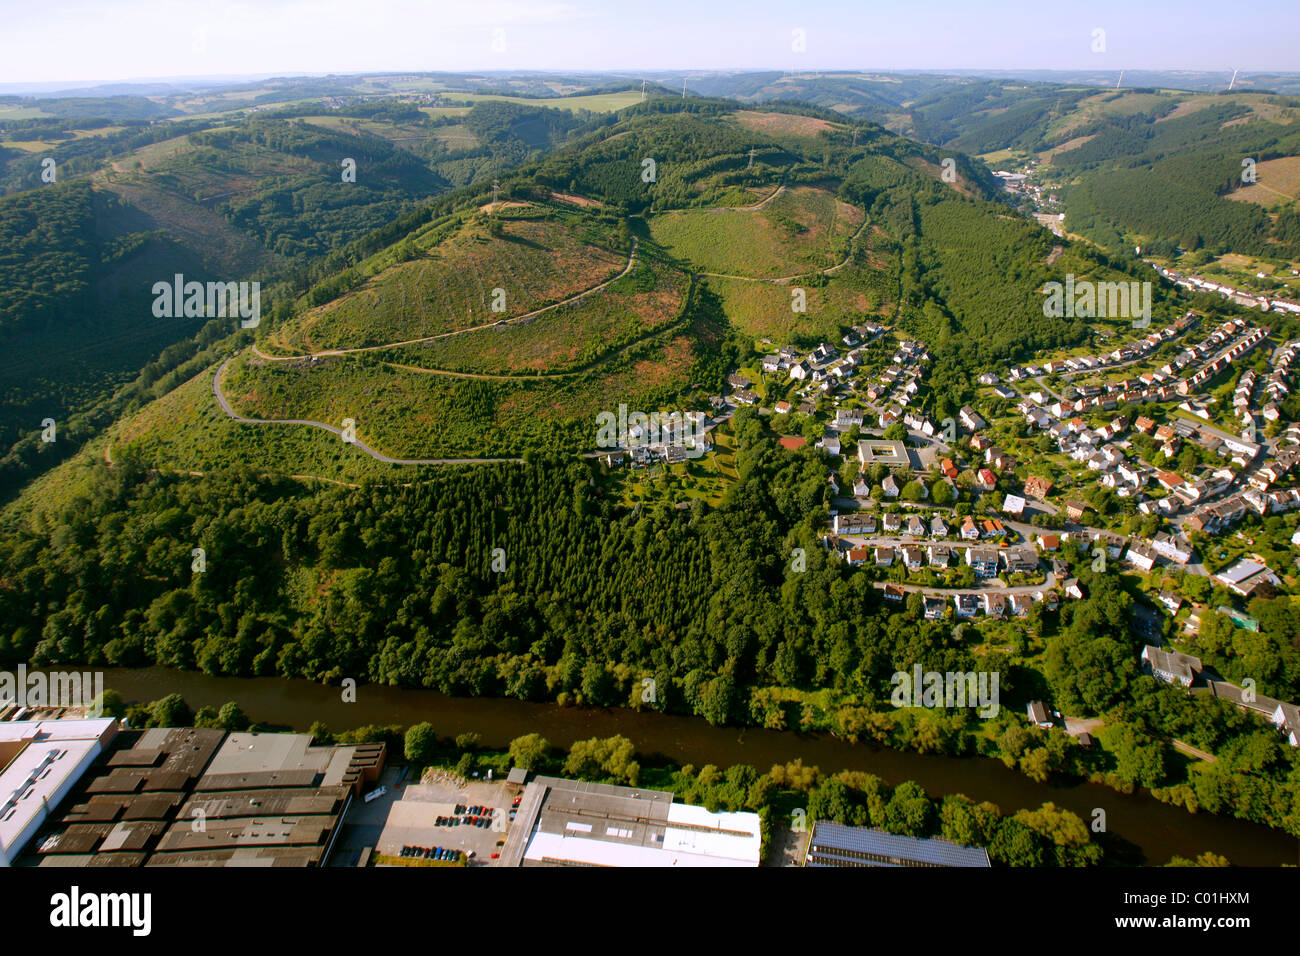 Aerial view, areas damaged by the storm Kyrill, storm damage, Hohenlimburg district, Hagen, Ruhrgebiet area Stock Photo